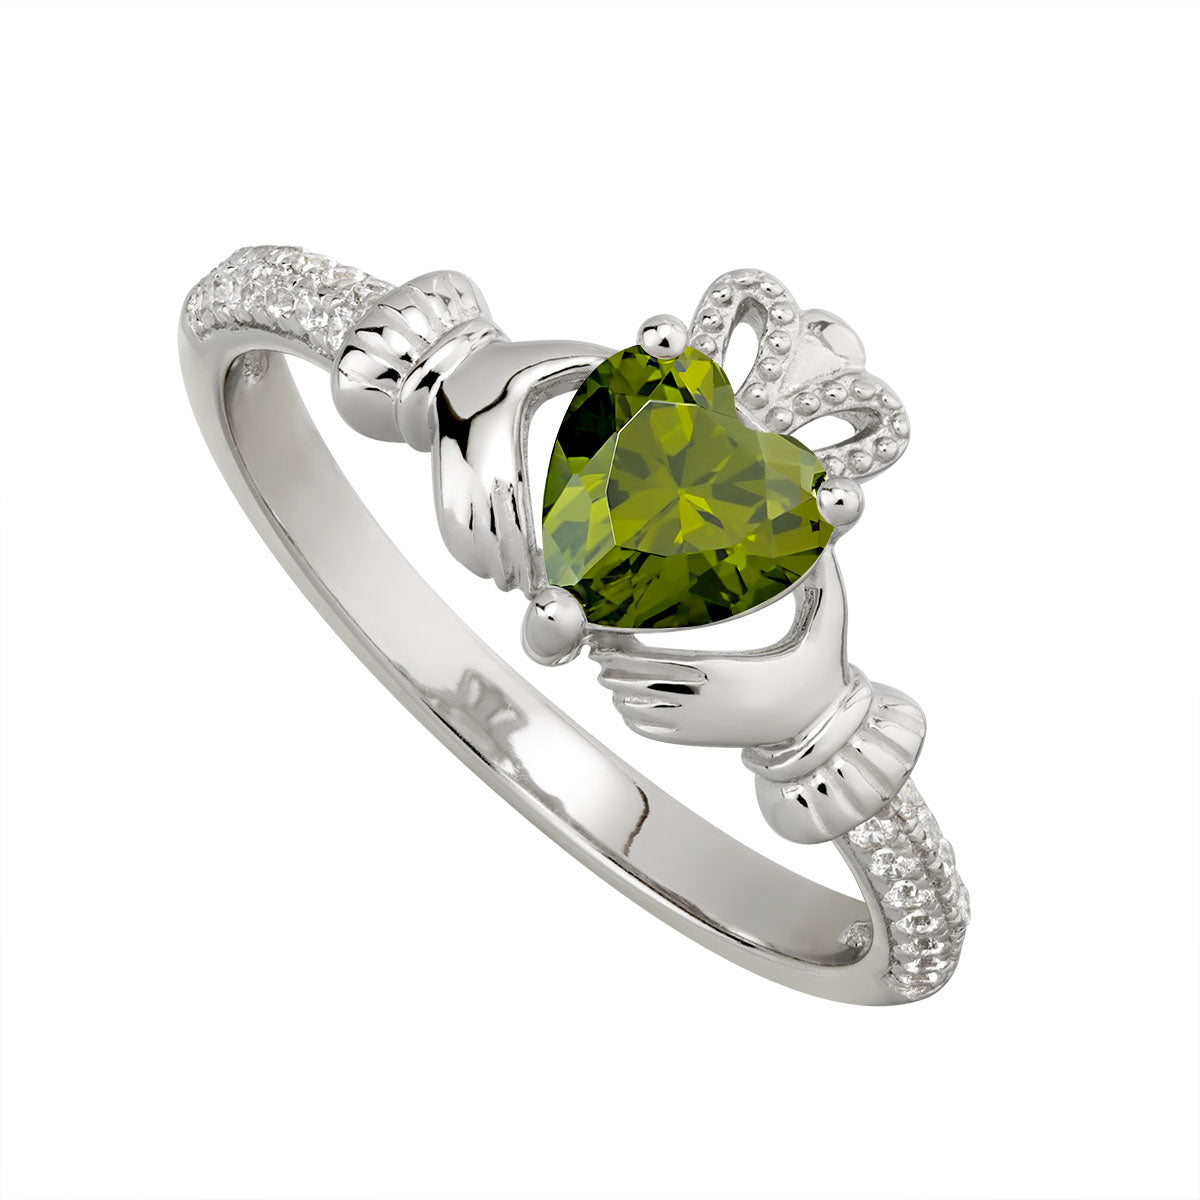 sterling silver claddagh ring august birthstone s2106208 from Solvar